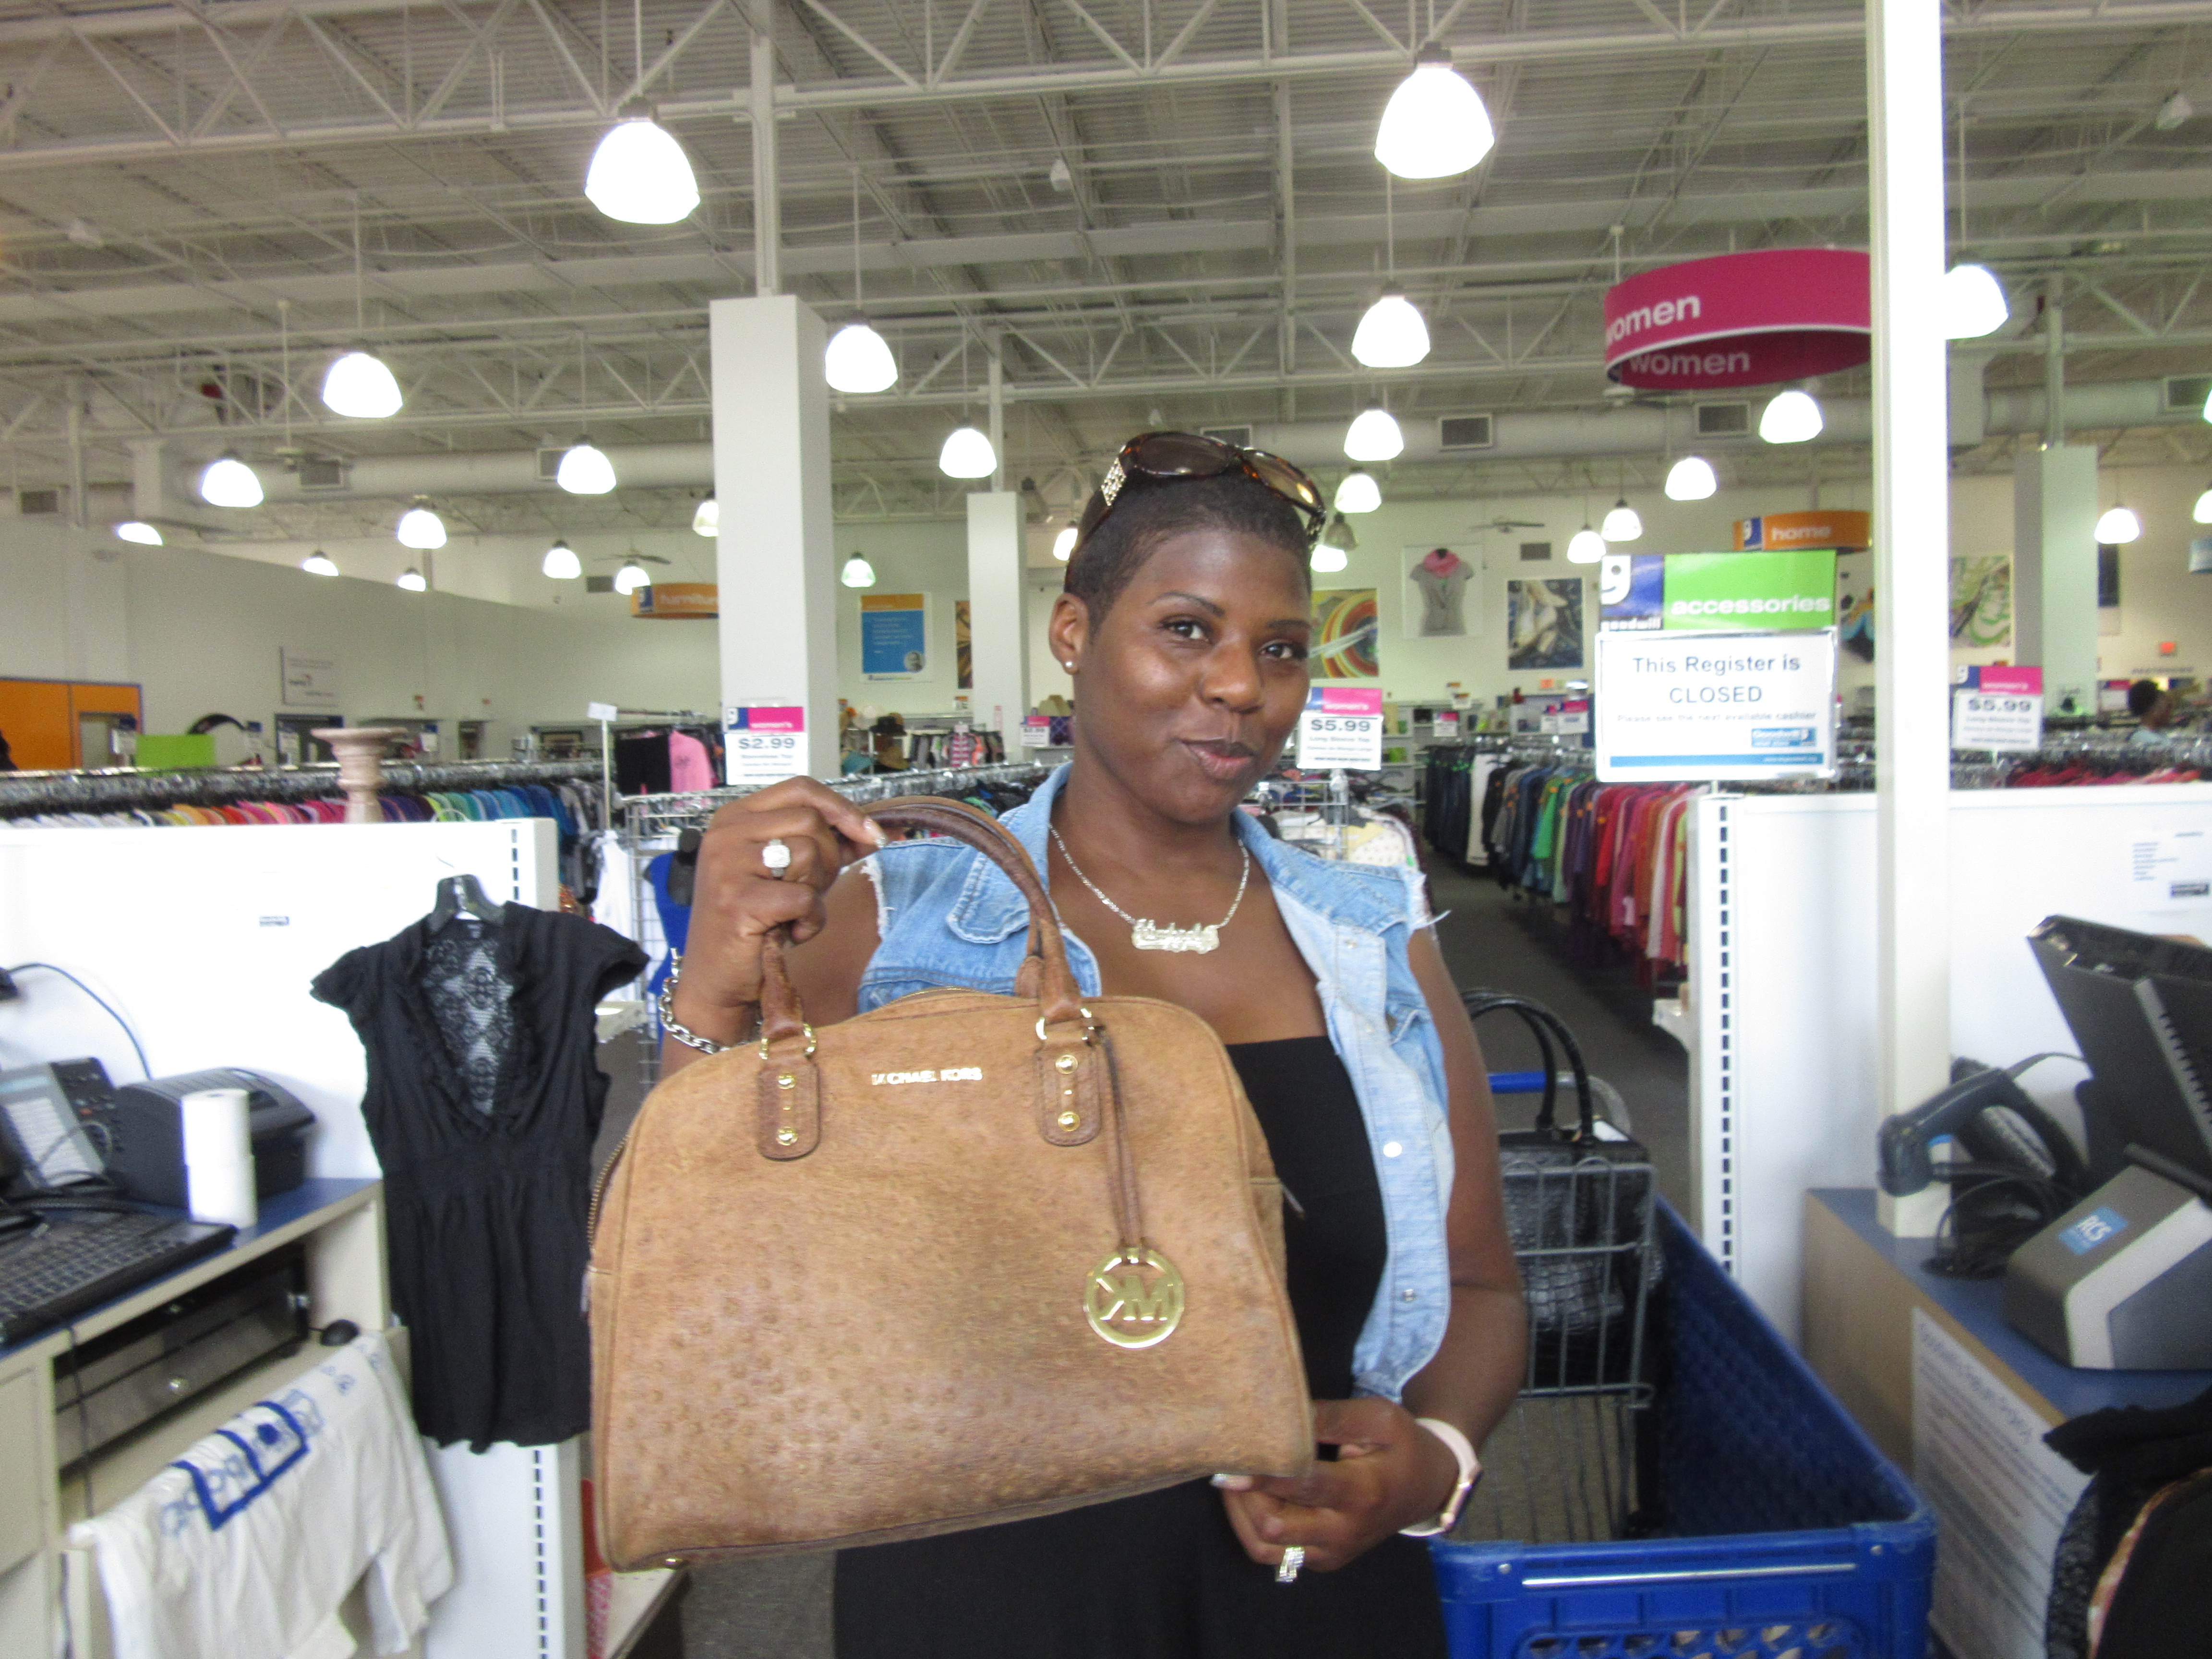 Meetup shopper poses with Michael Kors handbag found at Bowie Goodwill